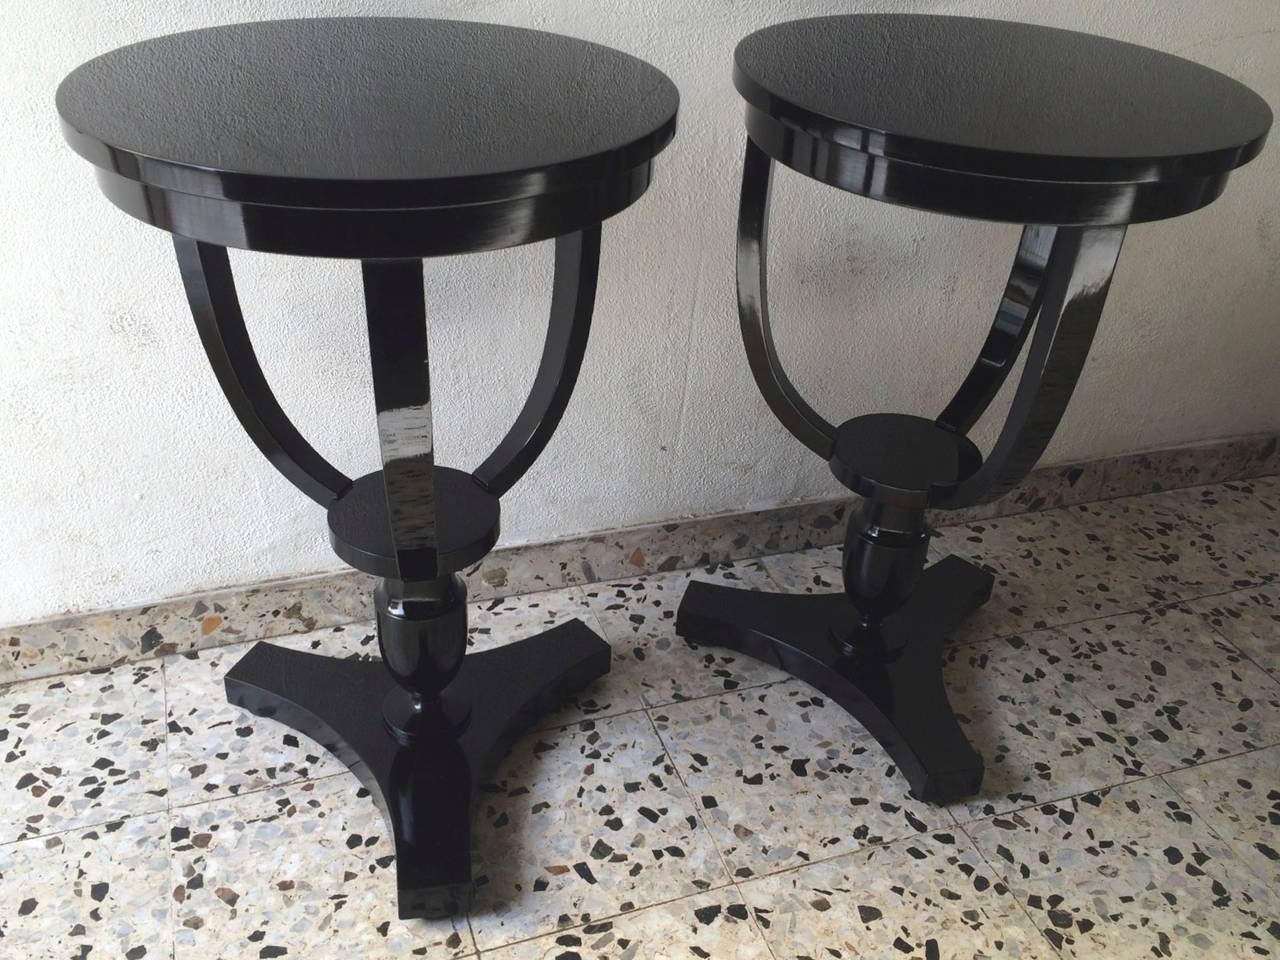 Maison Jansen 1940s neoclassic superb pair of black lacquered side tables.